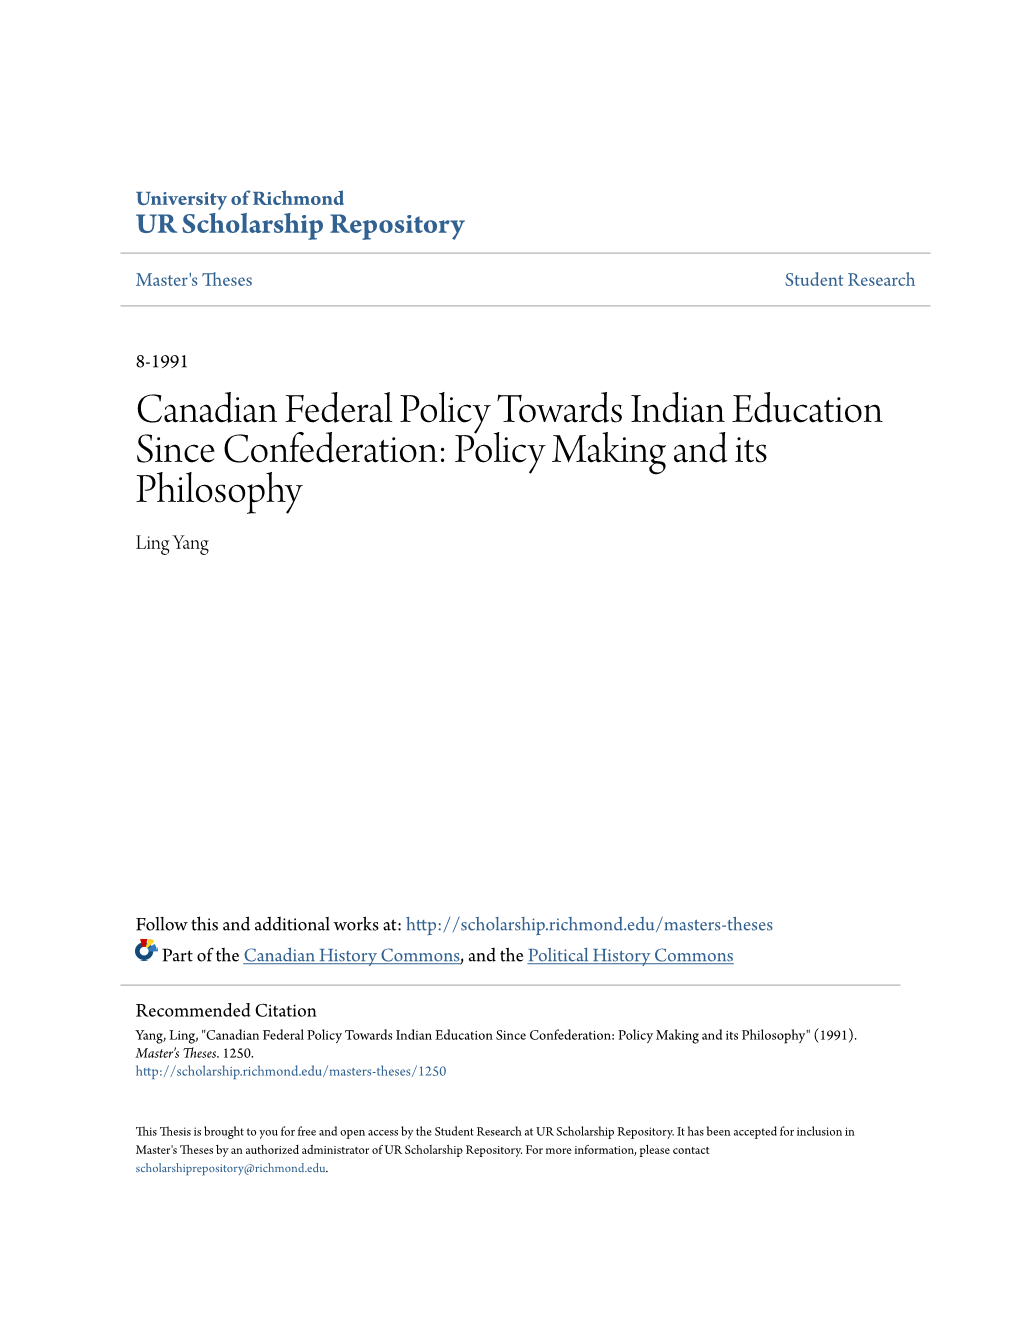 Canadian Federal Policy Towards Indian Education Since Confederation: Policy Making and Its Philosophy Ling Yang